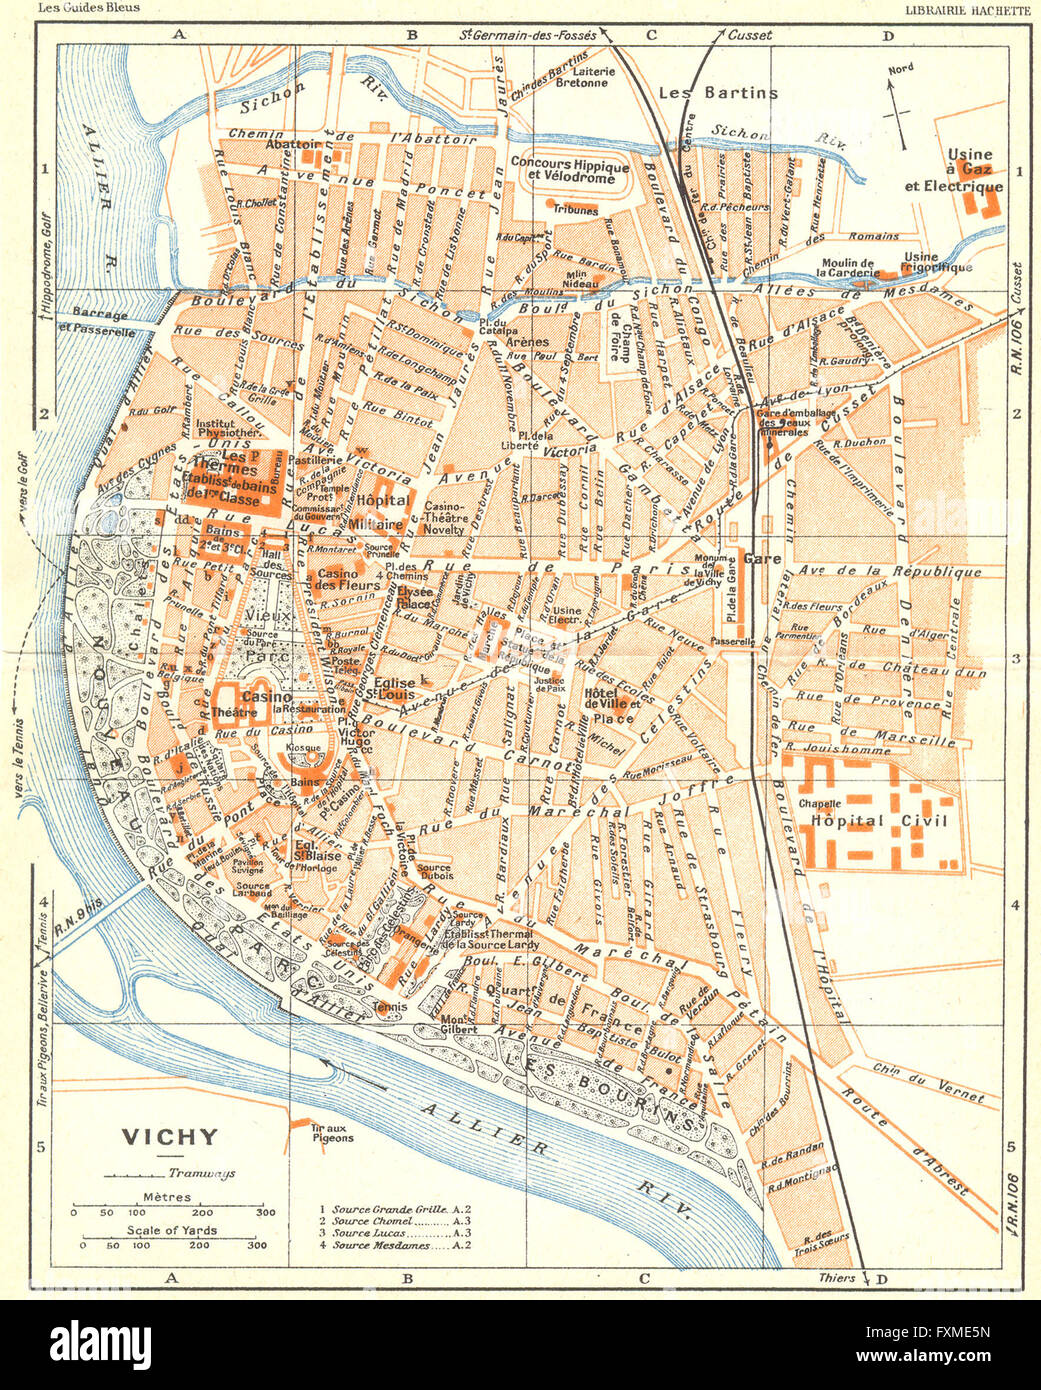 FRANCE: Vichy, 1926 vintage map Stock Photo